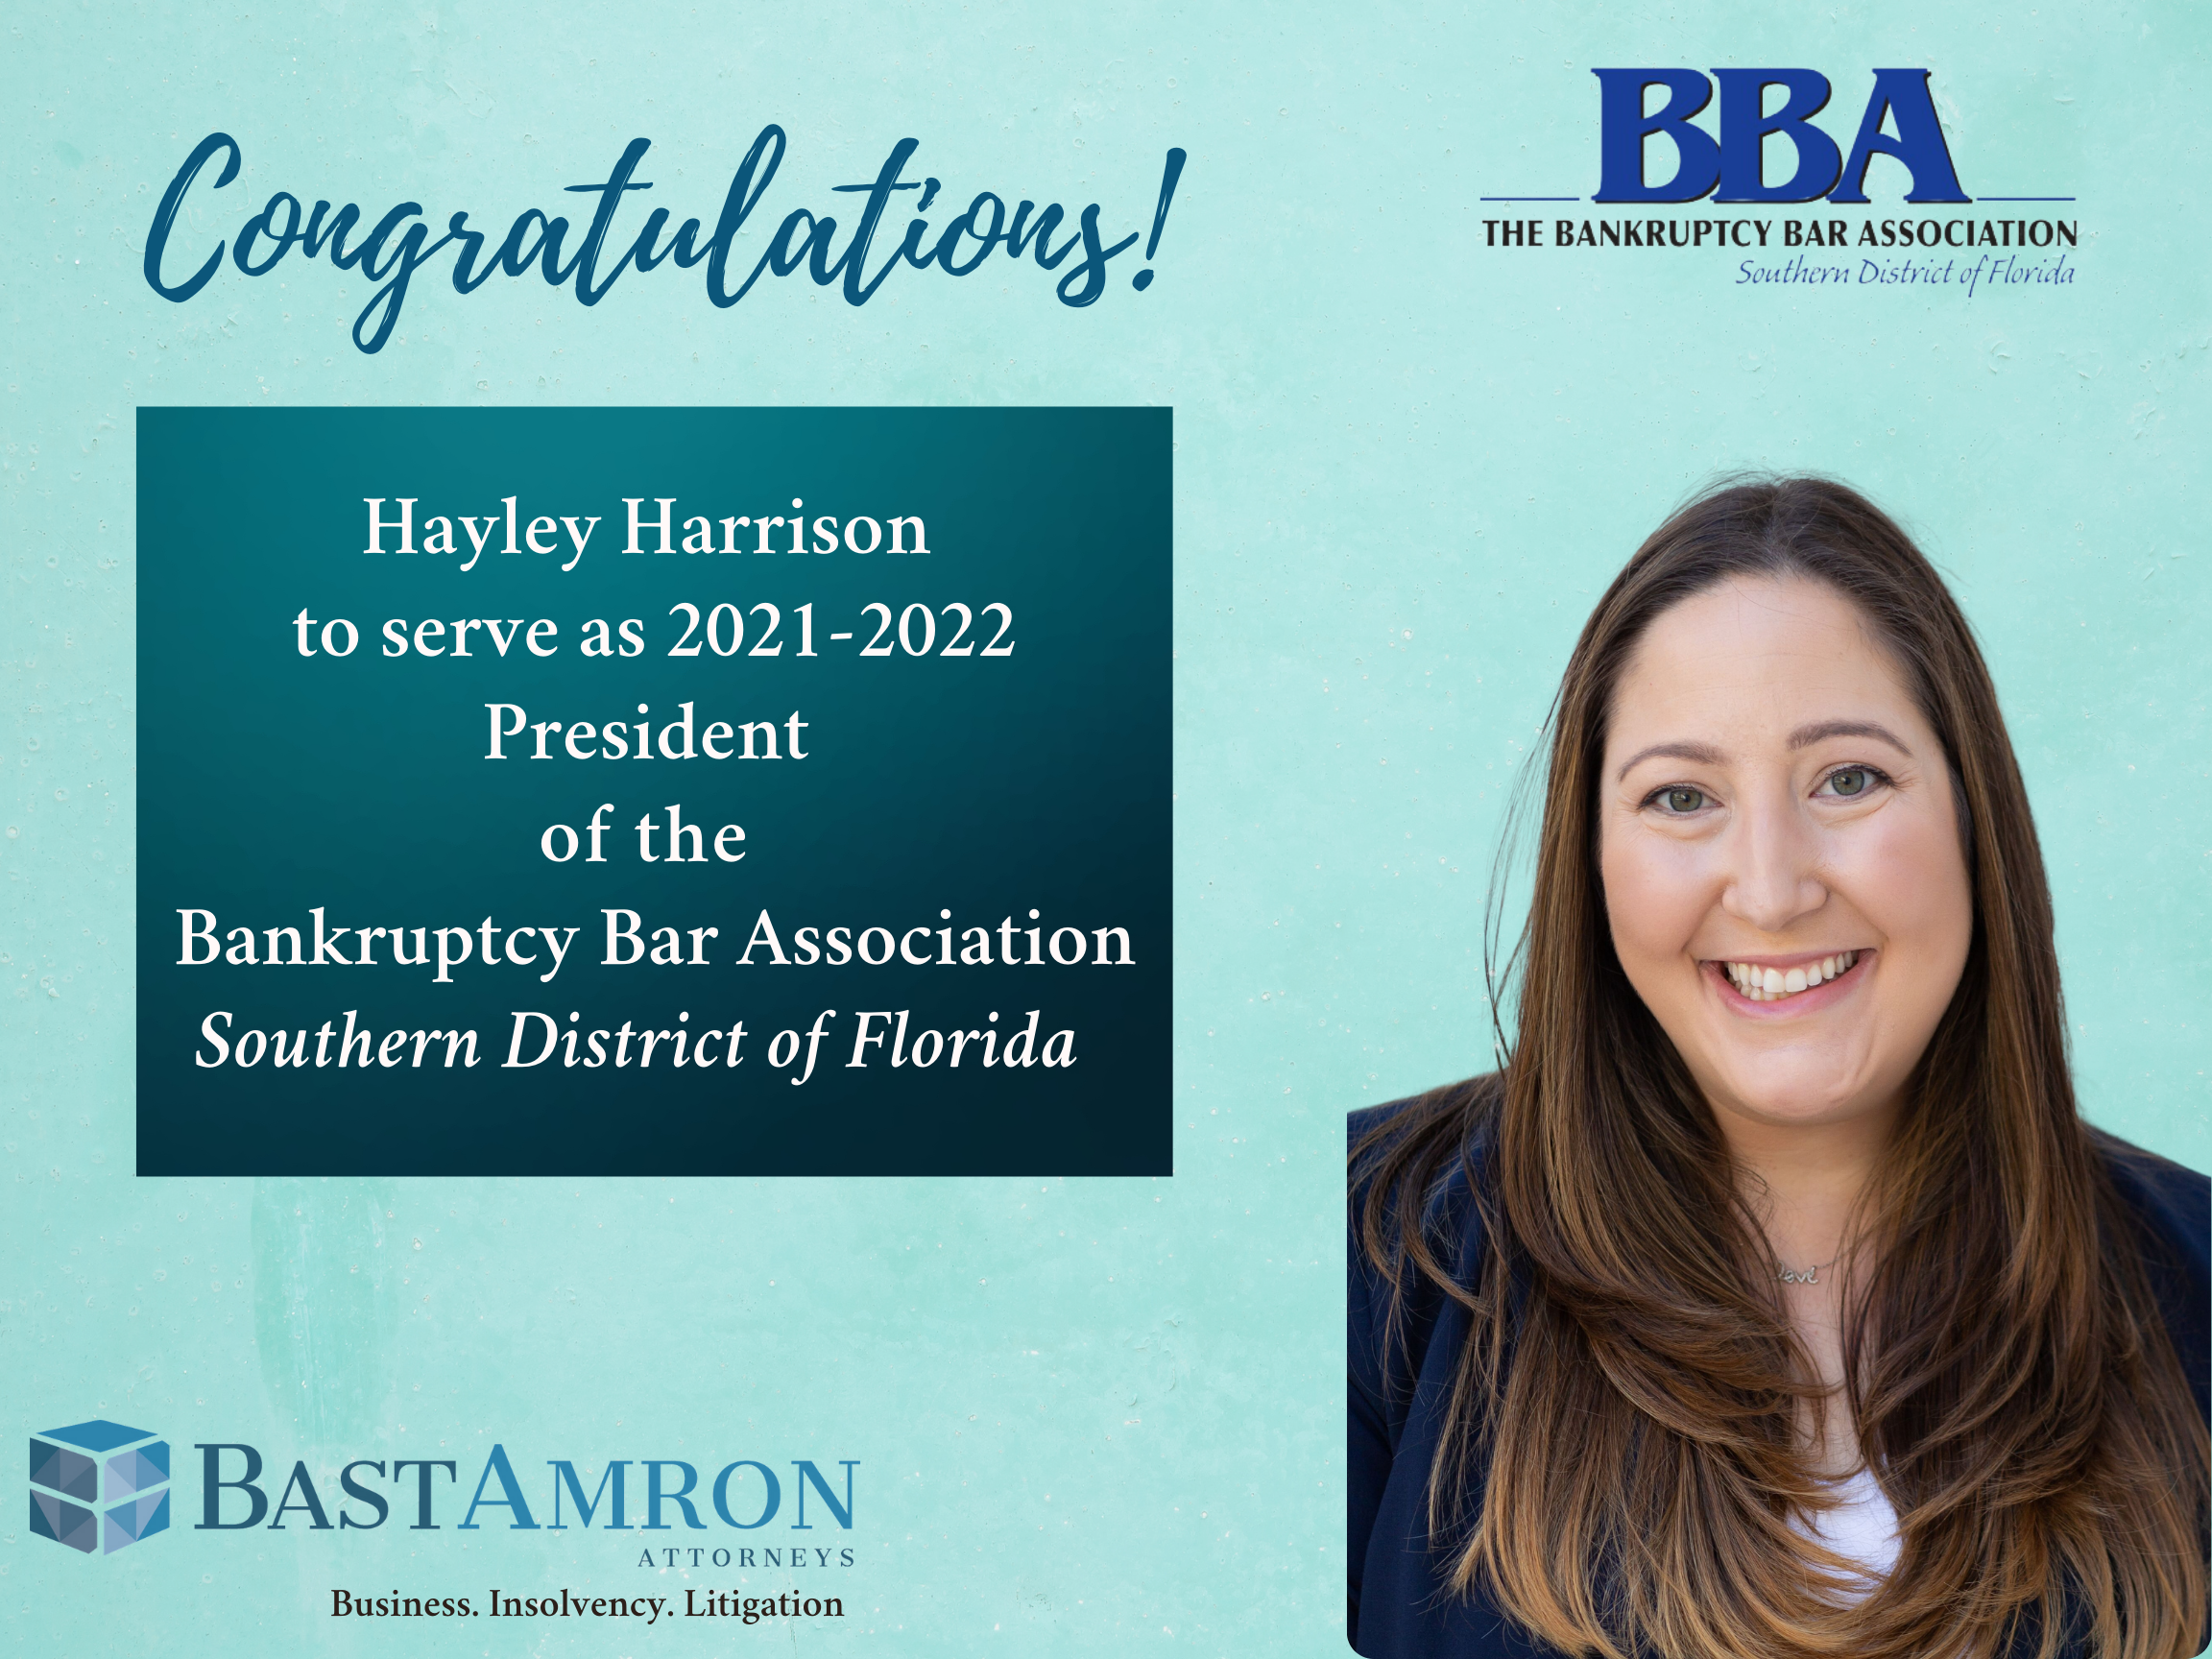 BAST AMRON OF COUNSEL HAYLEY HARRISON TO SERVE AS PRESIDENT OF THE BANKRUPTCY BAR ASSOCIATION BOARD